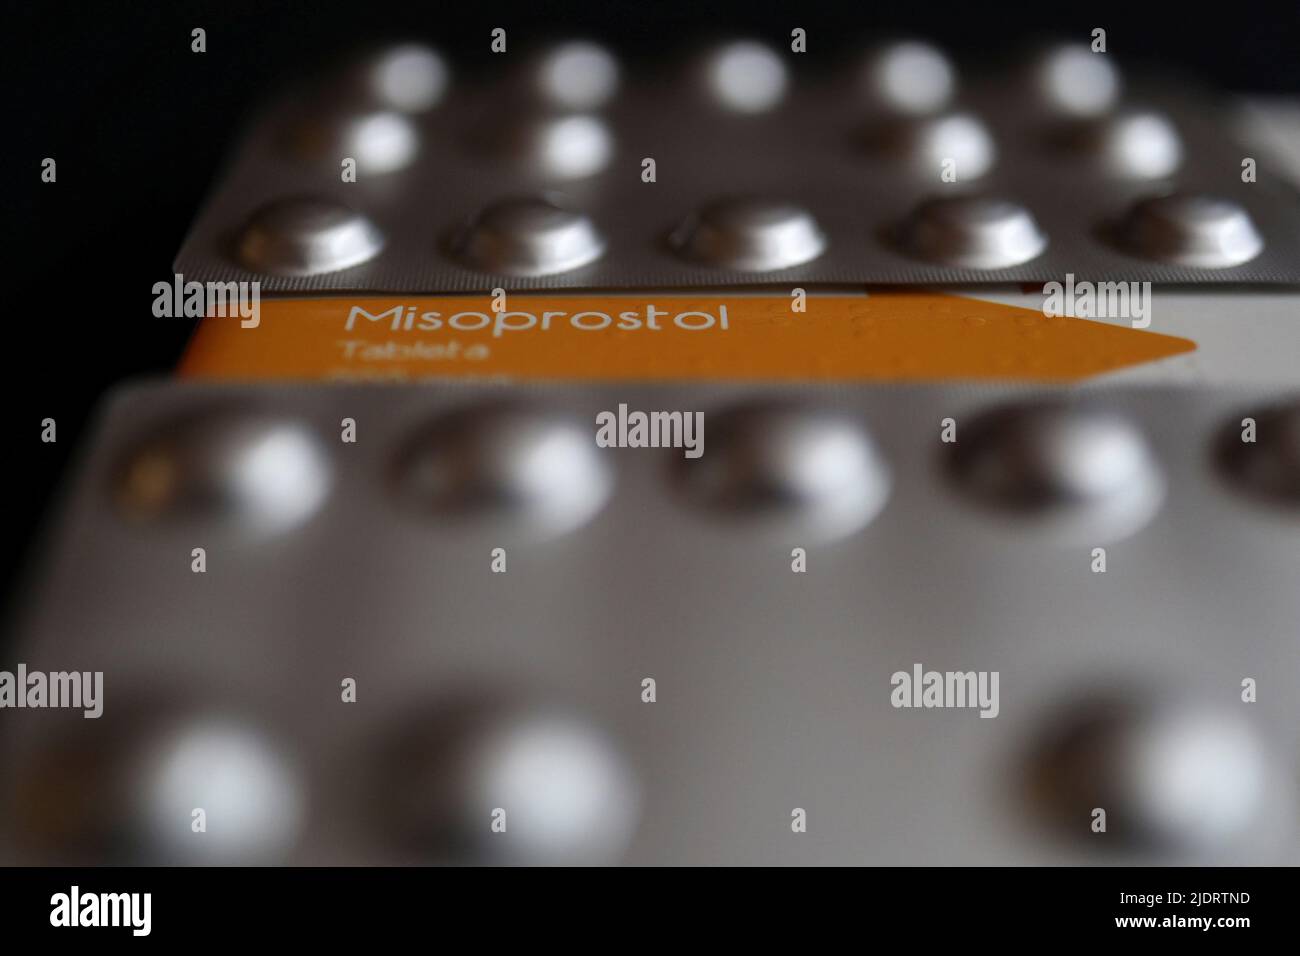 A box of Misoprostol, used to terminate early pregnancies, is pictured in this illustration taken June 20, 2022. REUTERS/Edgard Garrido/Illustration Stock Photo